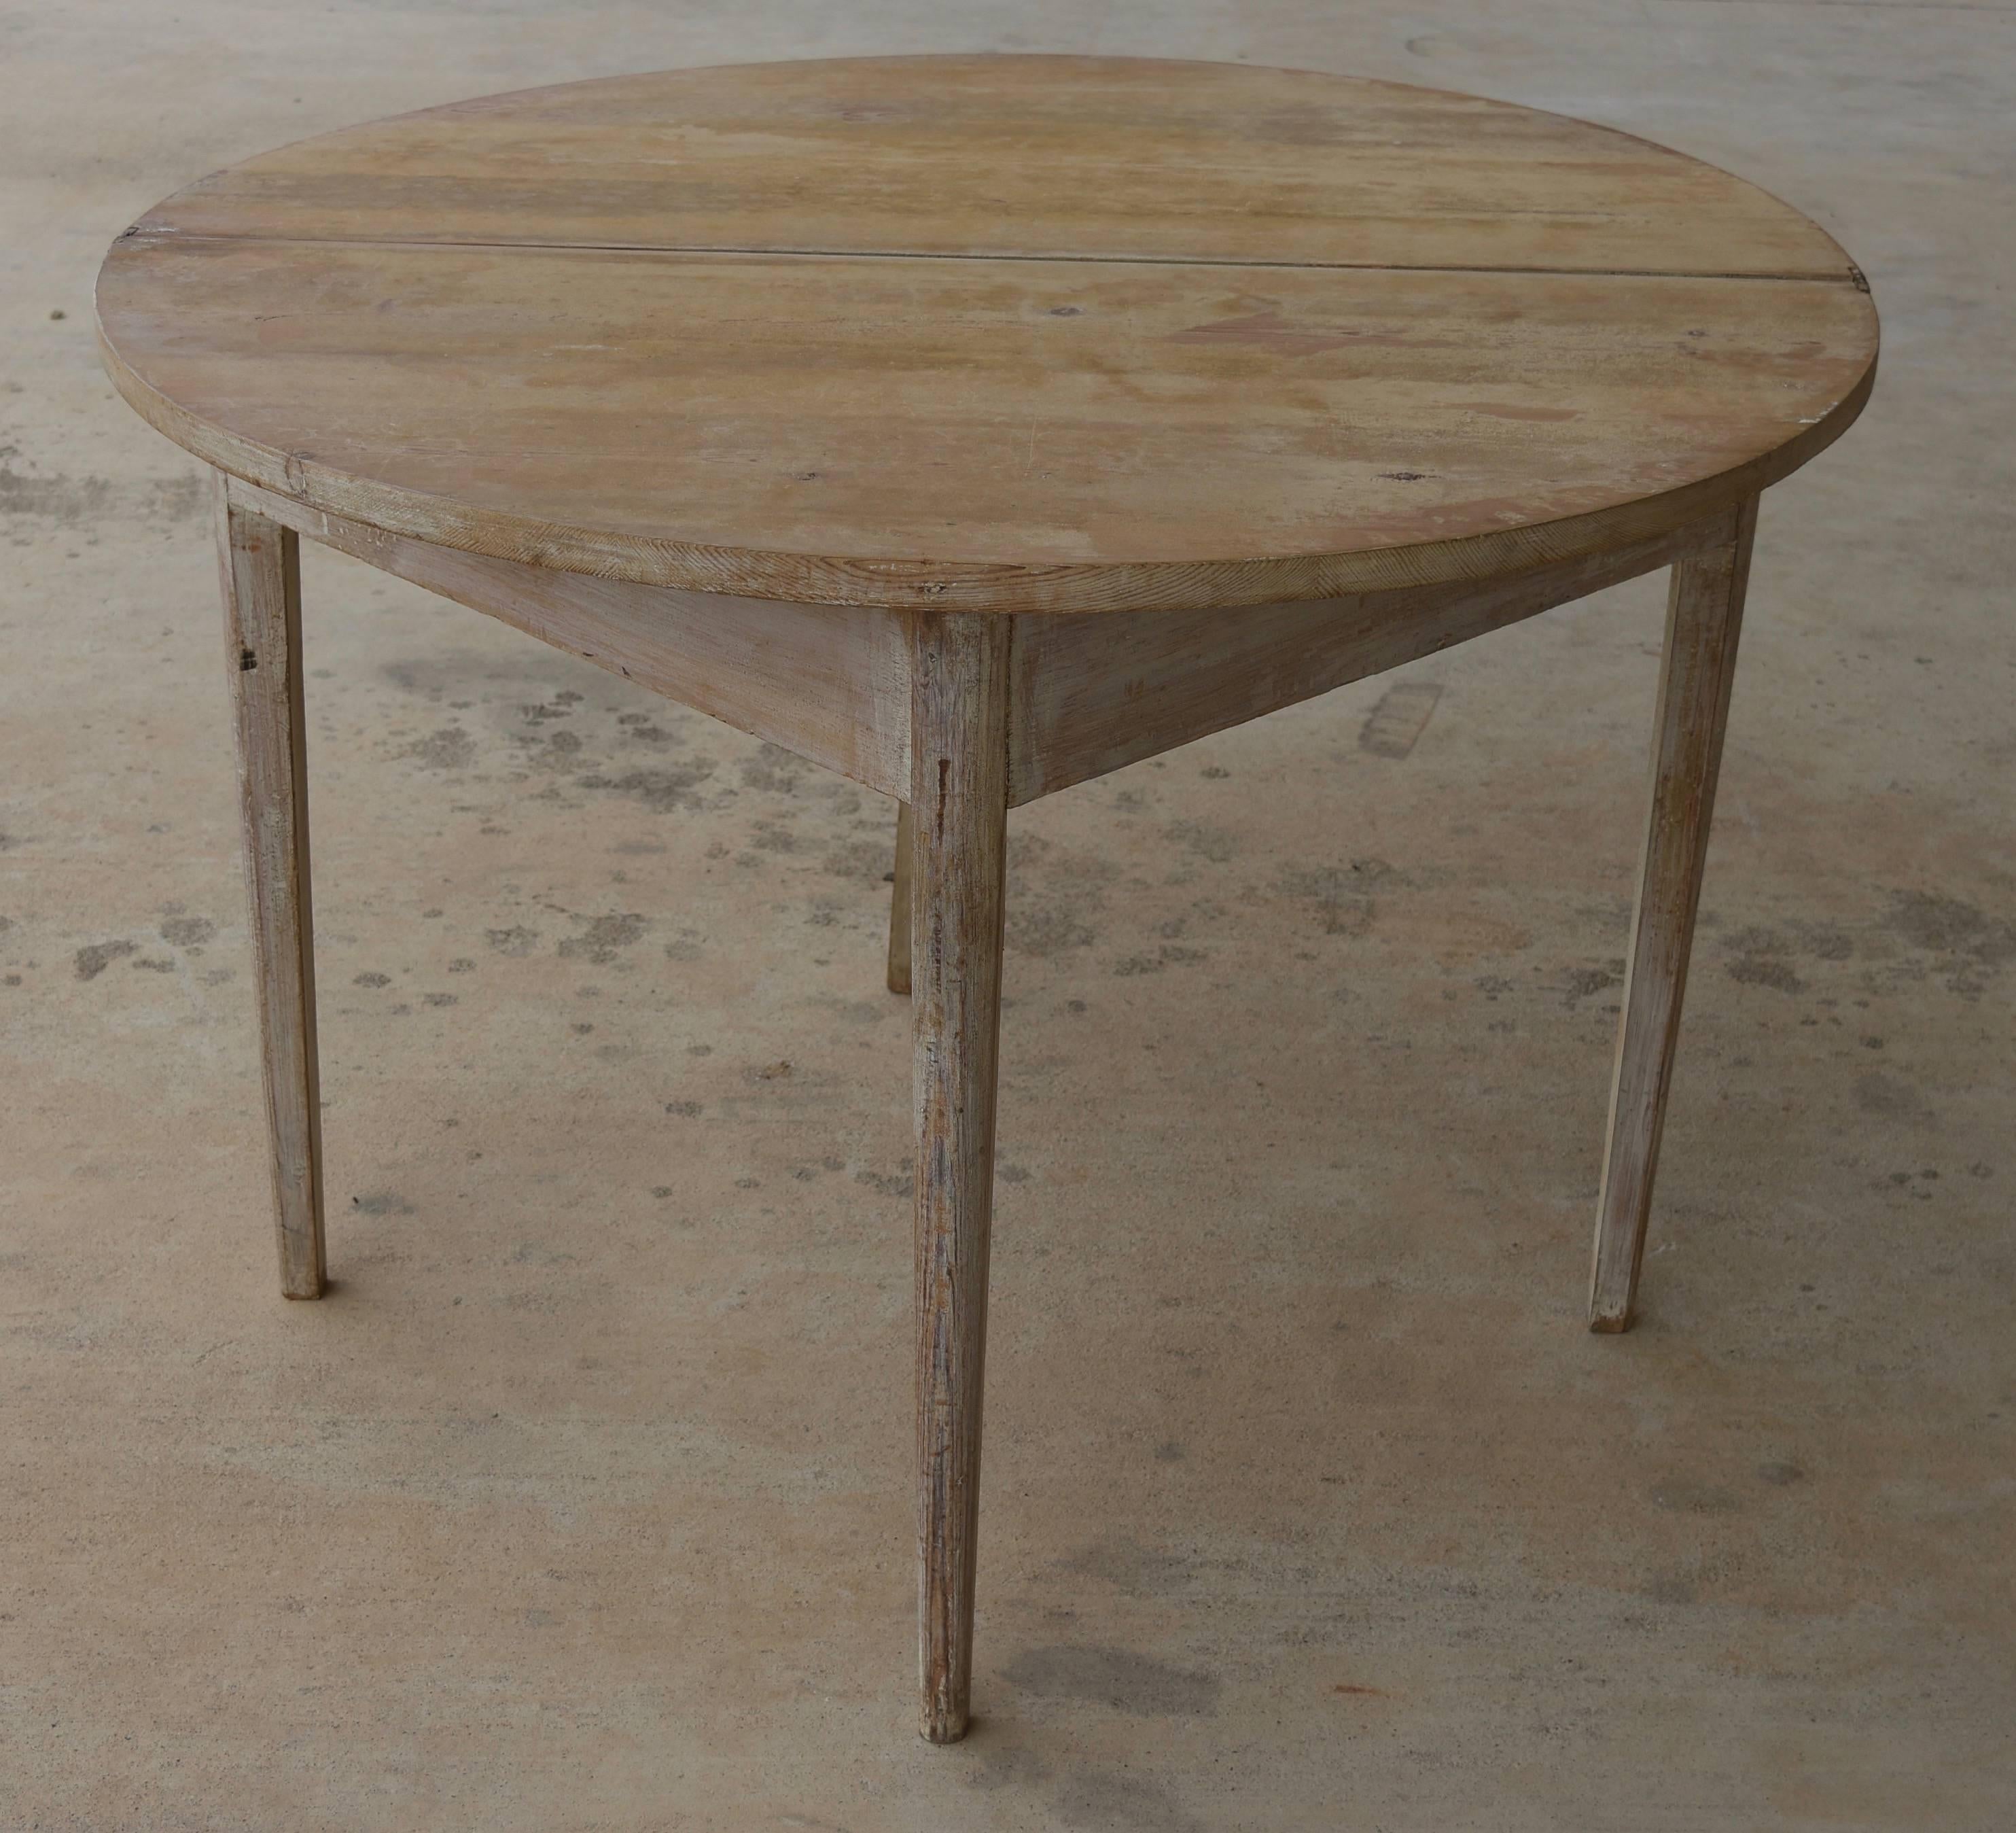 Gustavian Painted Folding Swedish Demilune Table That Opens to Round Table, circa 1850